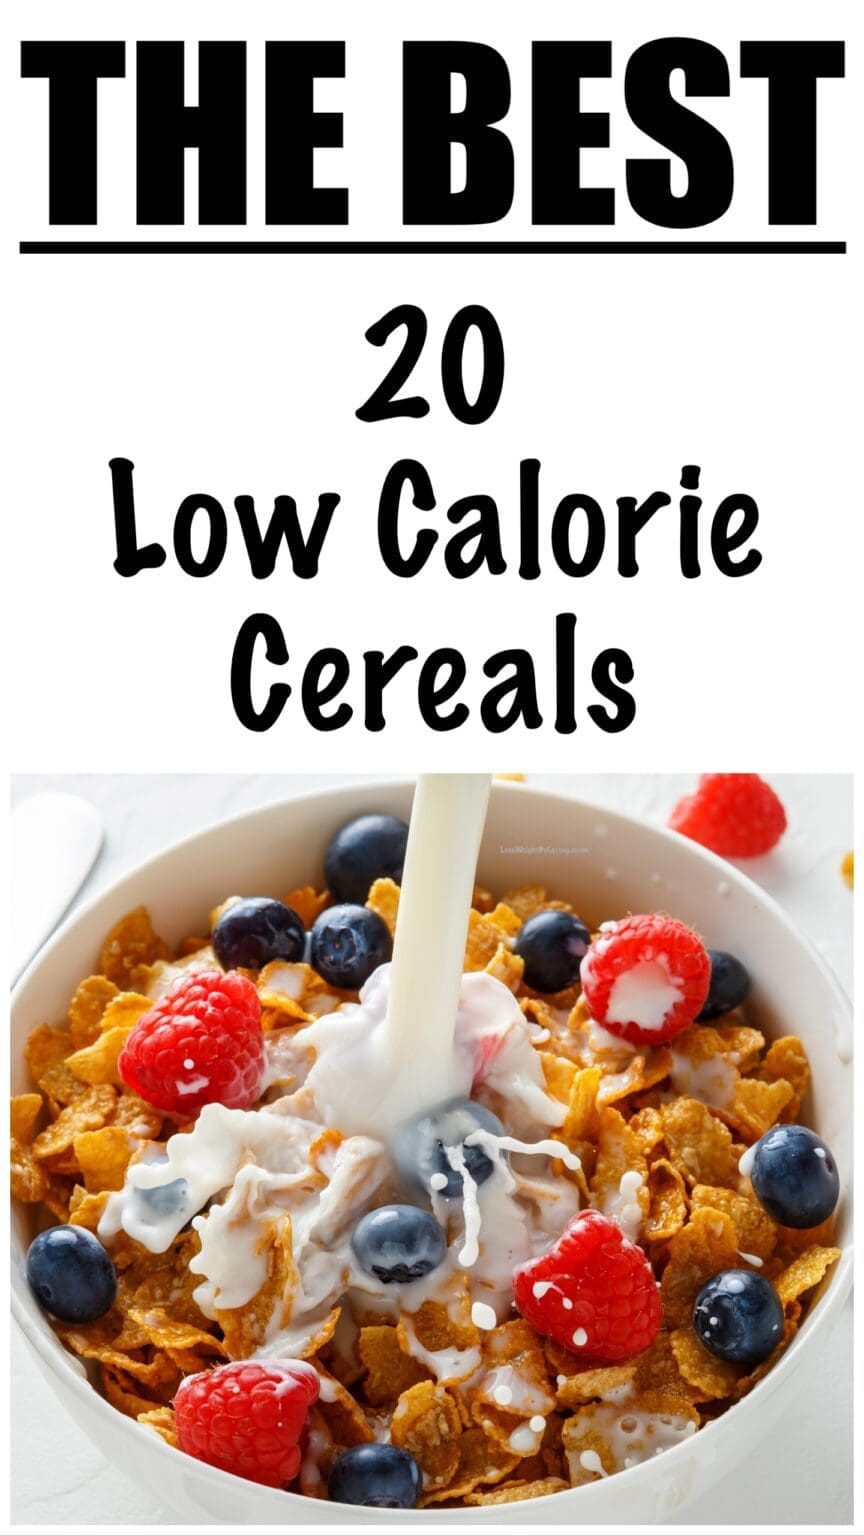 20 Low Calorie Cereals to Buy - Lose Weight By Eating